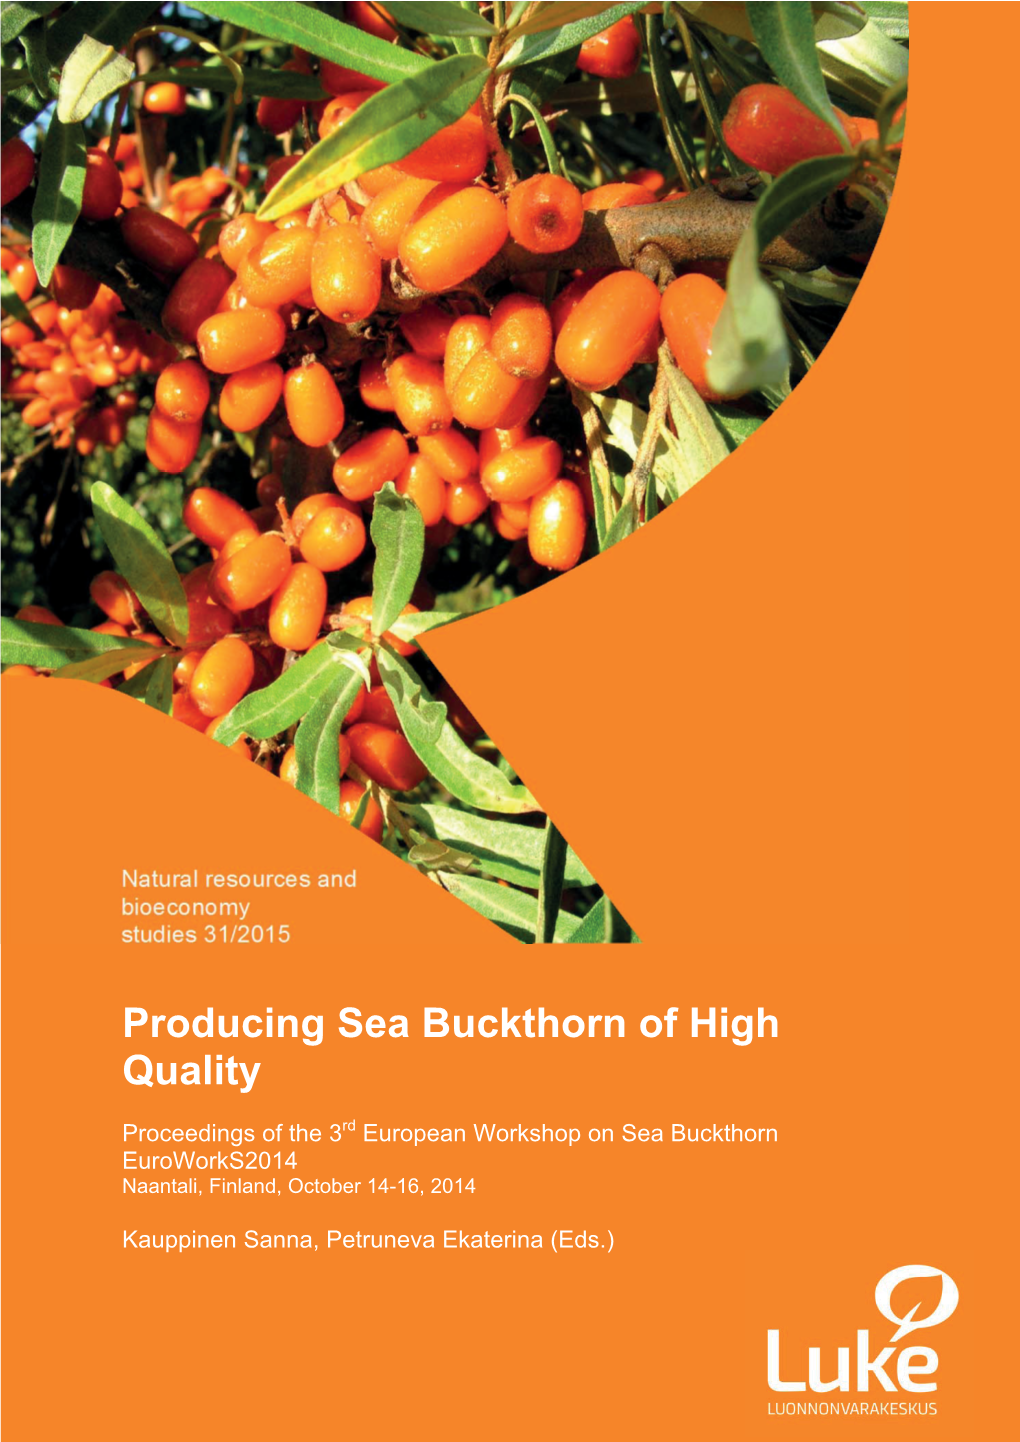 Producing Sea Buckthorn of High Quality